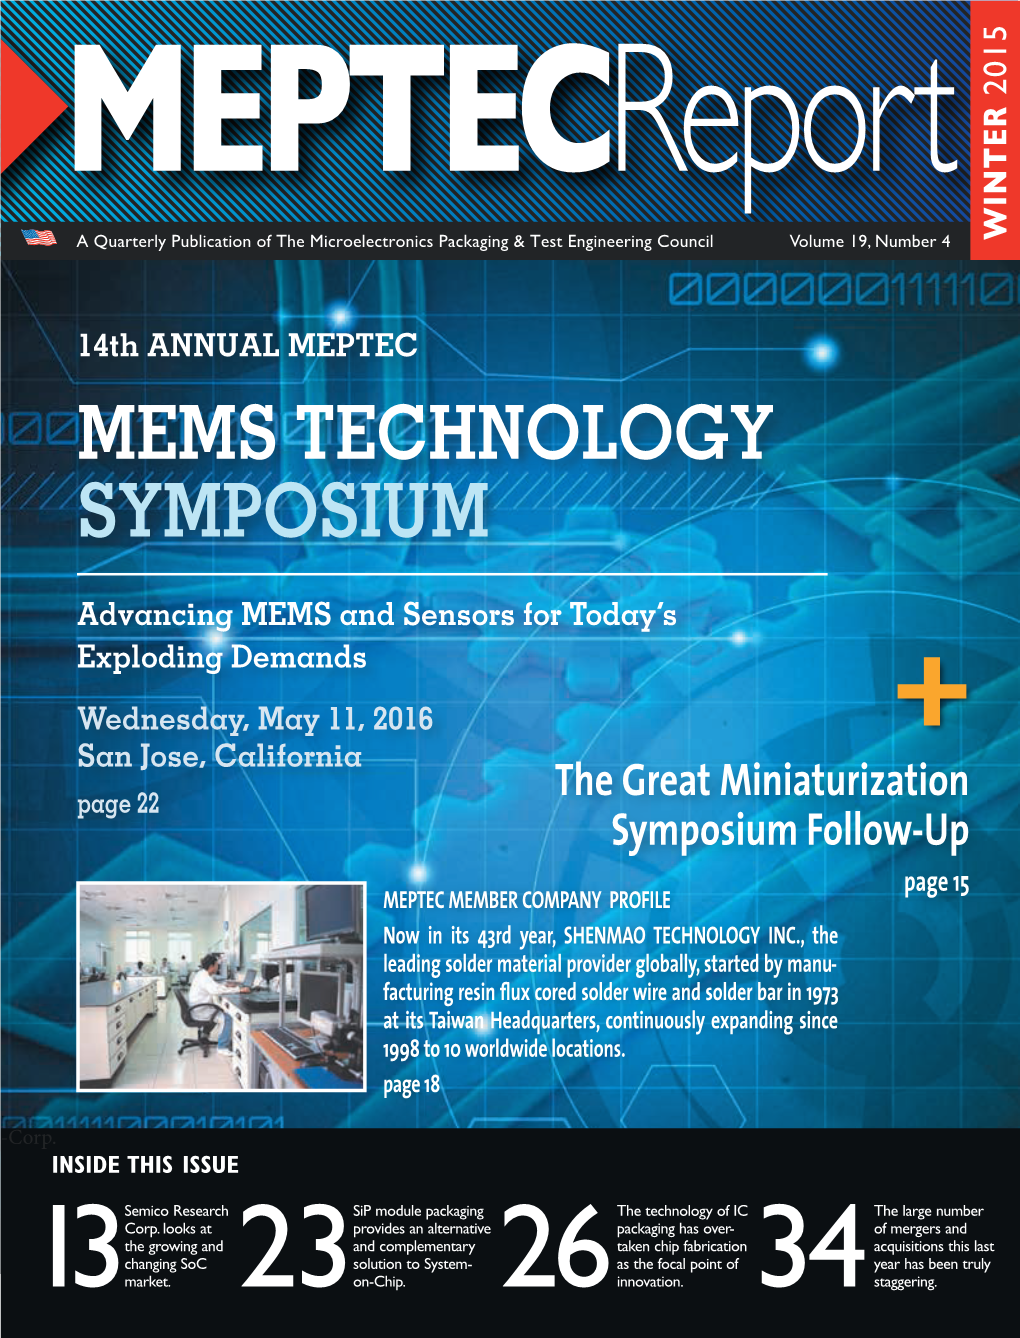 WINTER 2015 Meptec.Org Meptec.Org WINTER 2015 MEPTEC REPORT 13 Rich Rice SEMICO RESEARCH CORP